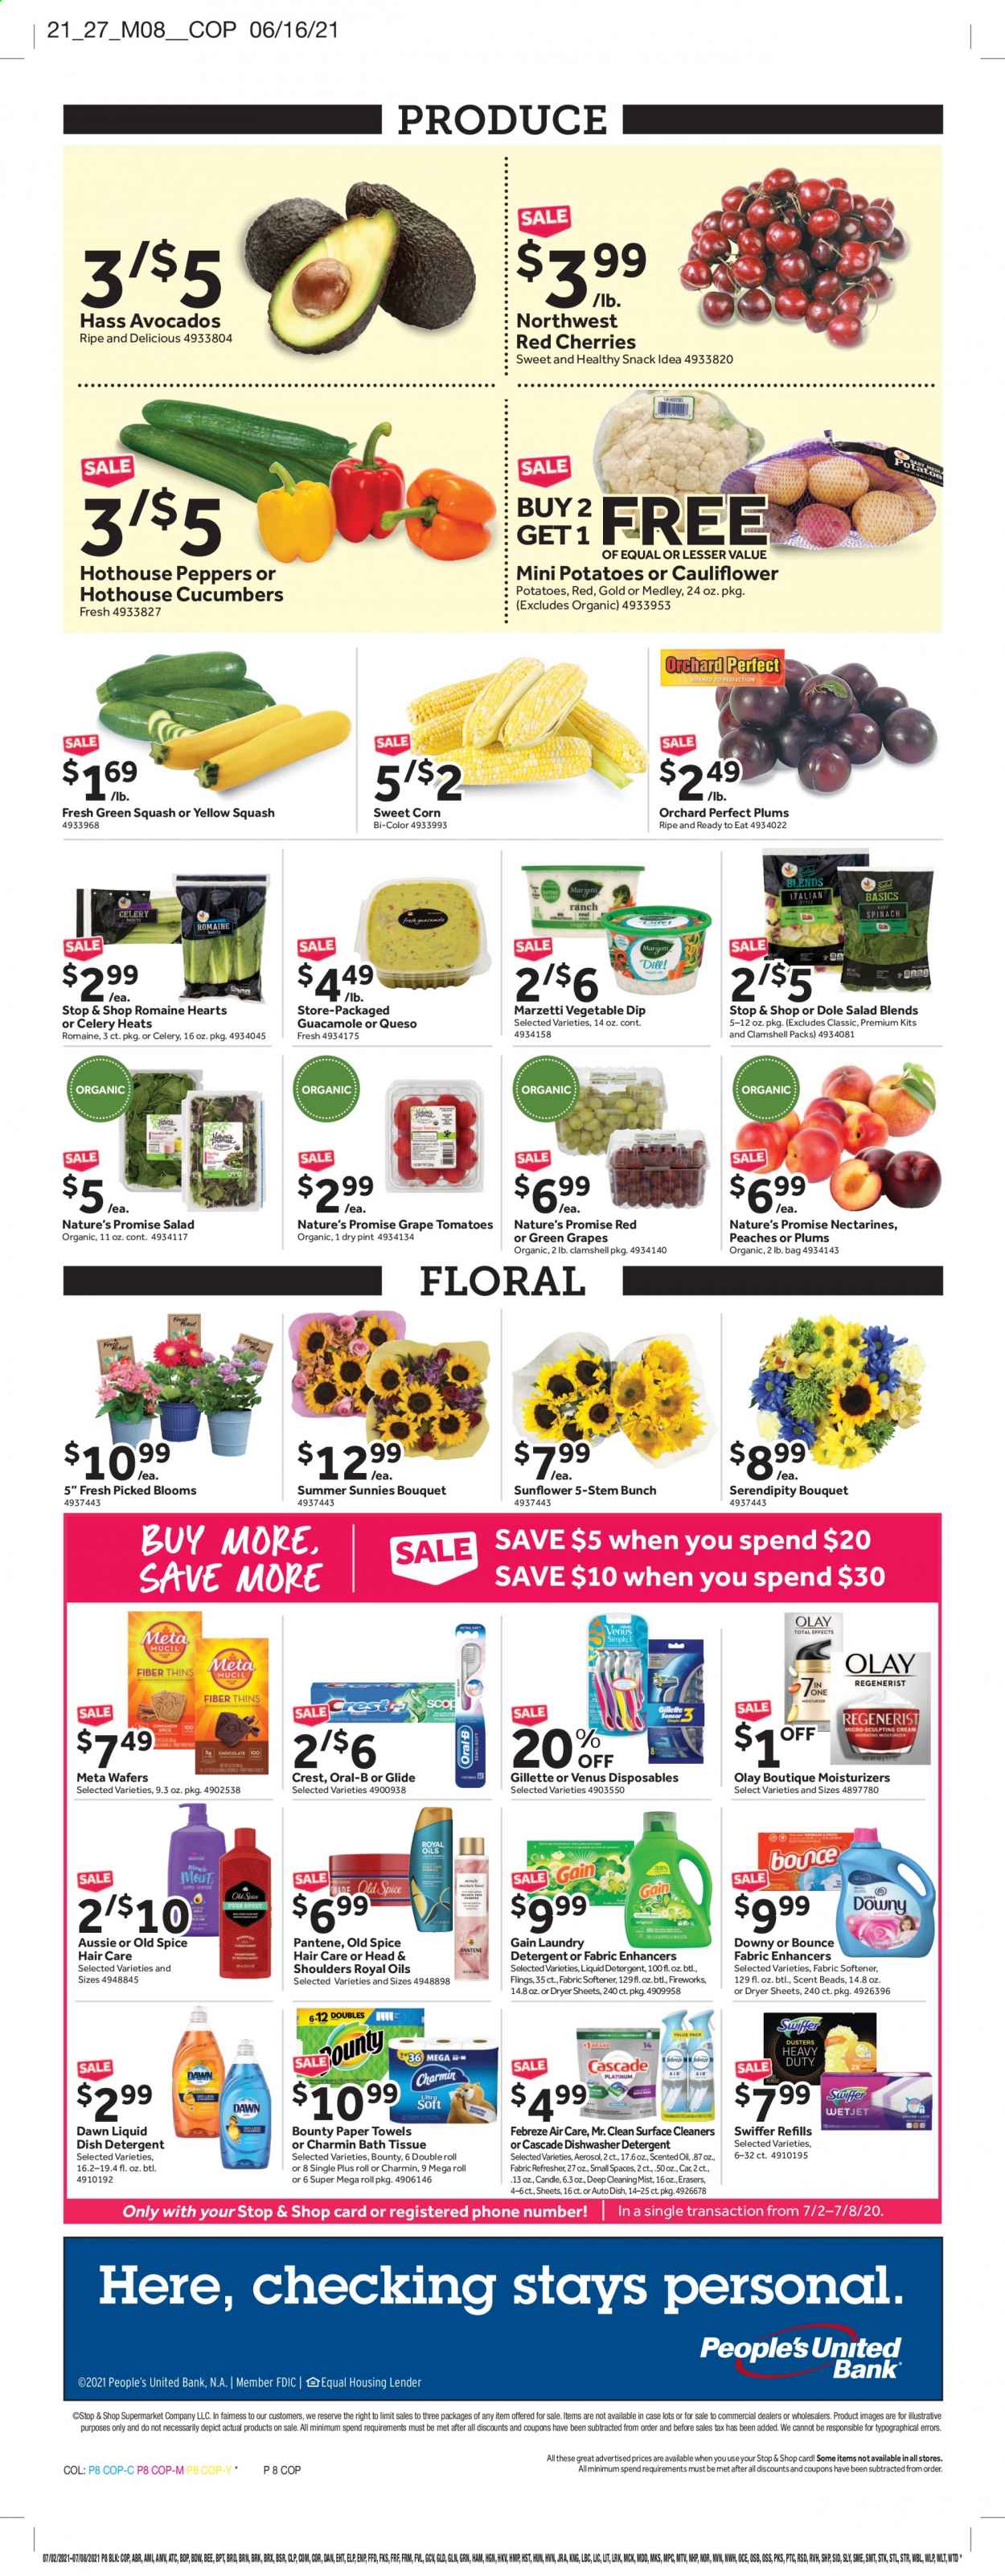 thumbnail - Stop & Shop Flyer - 07/02/2021 - 07/08/2021 - Sales products - plums, Nature’s Promise, corn, cucumber, tomatoes, zucchini, potatoes, salad, Dole, peppers, sweet corn, yellow squash, cherries, ham, guacamole, dip, wafers, Bounty, spice, bath tissue, kitchen towels, paper towels, Charmin, Cascade, Gain, fabric softener, liquid detergent, laundry detergent, Bounce, dryer sheets, Old Spice, Oral-B, Crest, moisturizer, Olay, Aussie, refresher, Head & Shoulders, Pantene, candle, scented oil, nectarines, peaches. Page 8.